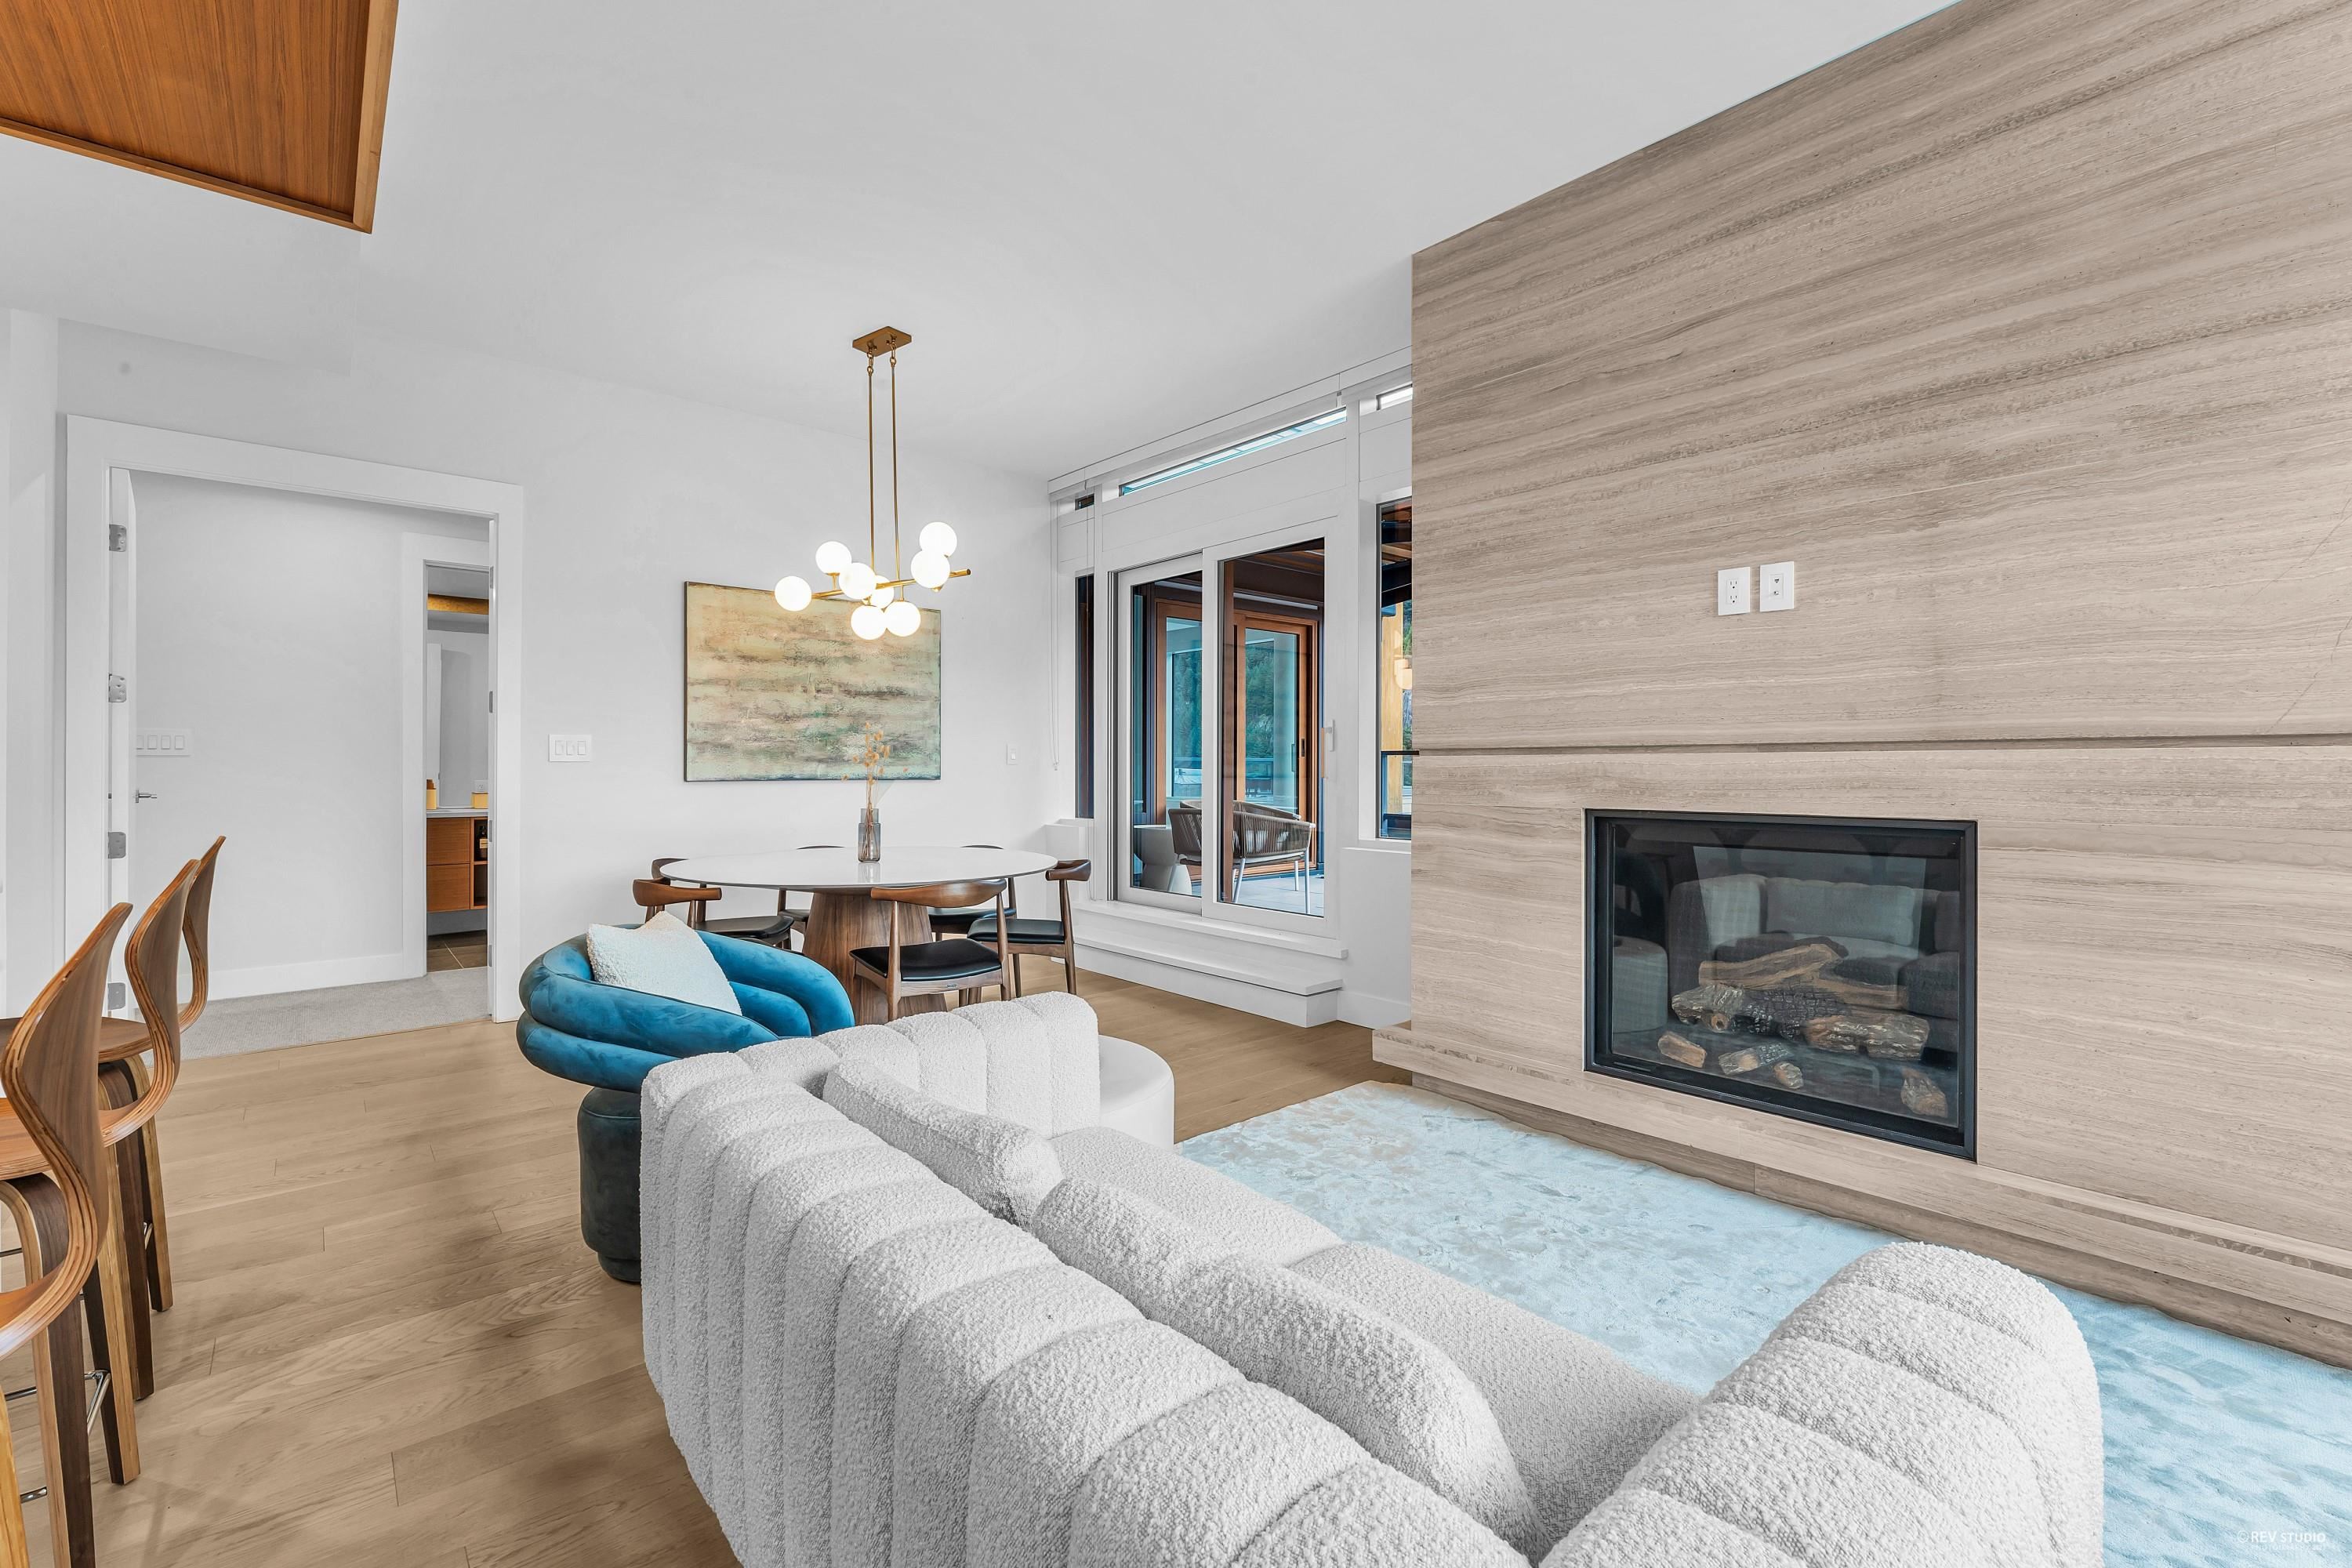 Listing image of 1002 6707 NELSON AVENUE